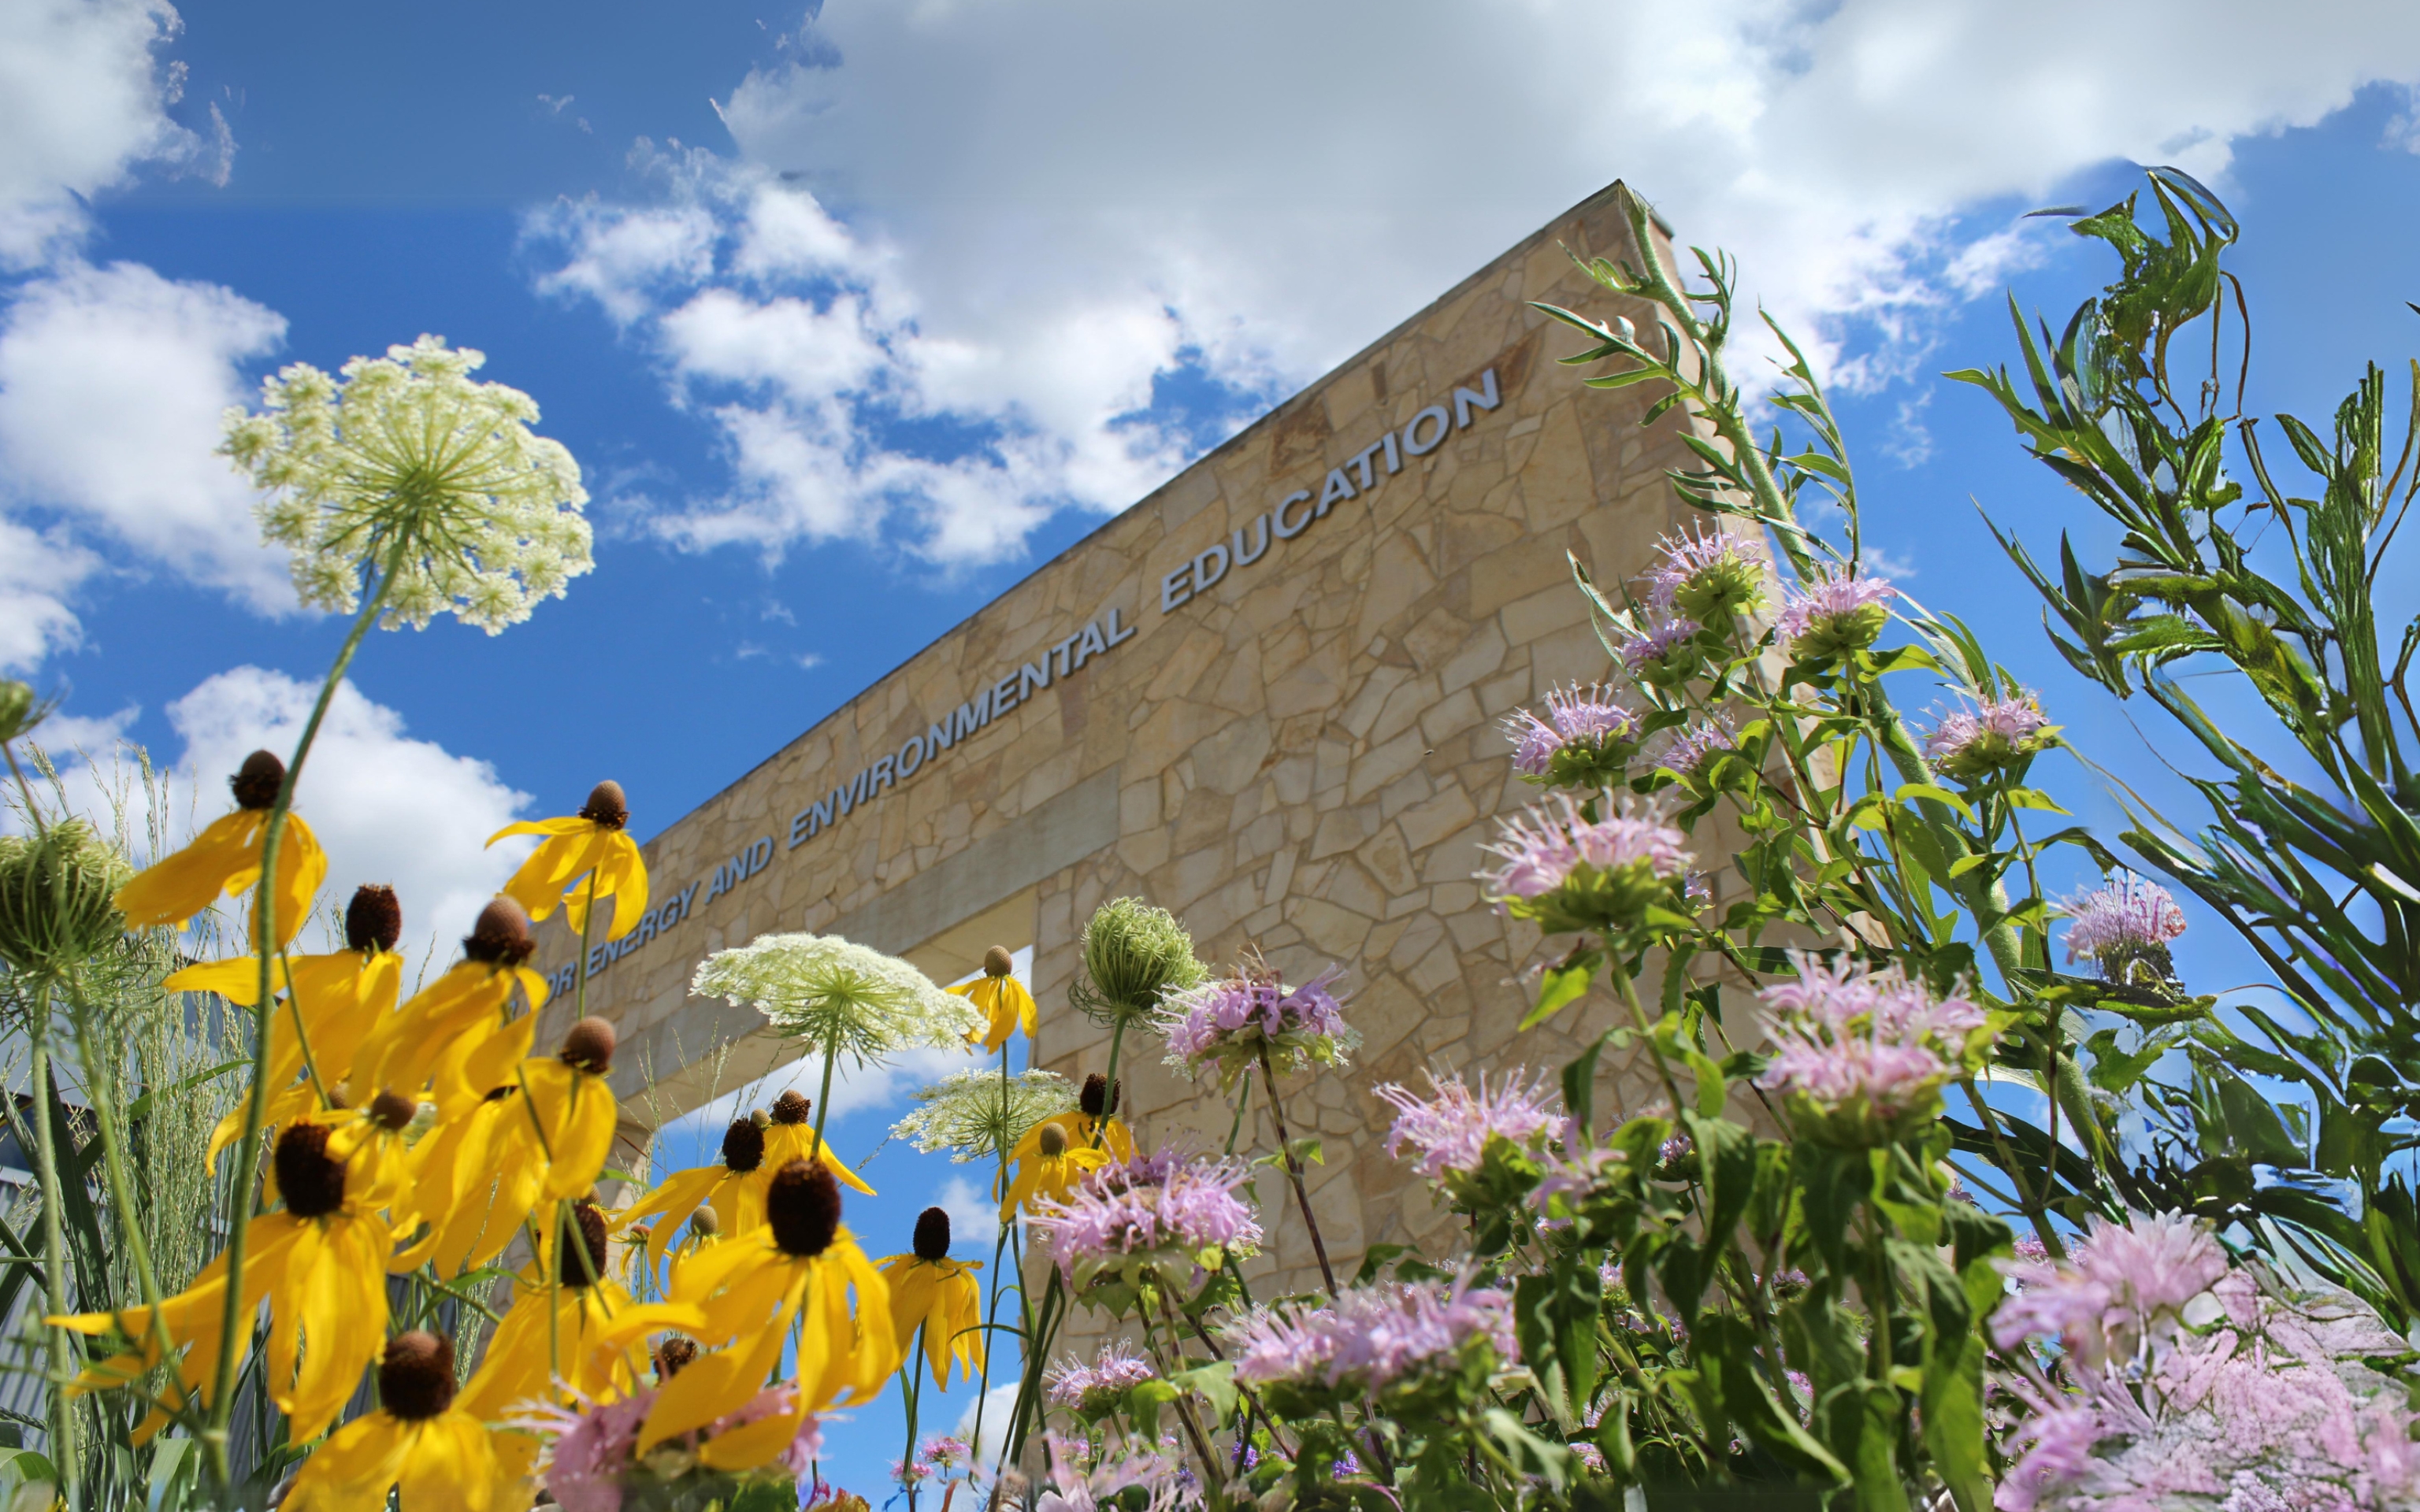 Exterior image of CEEE building with flowers in the foreground